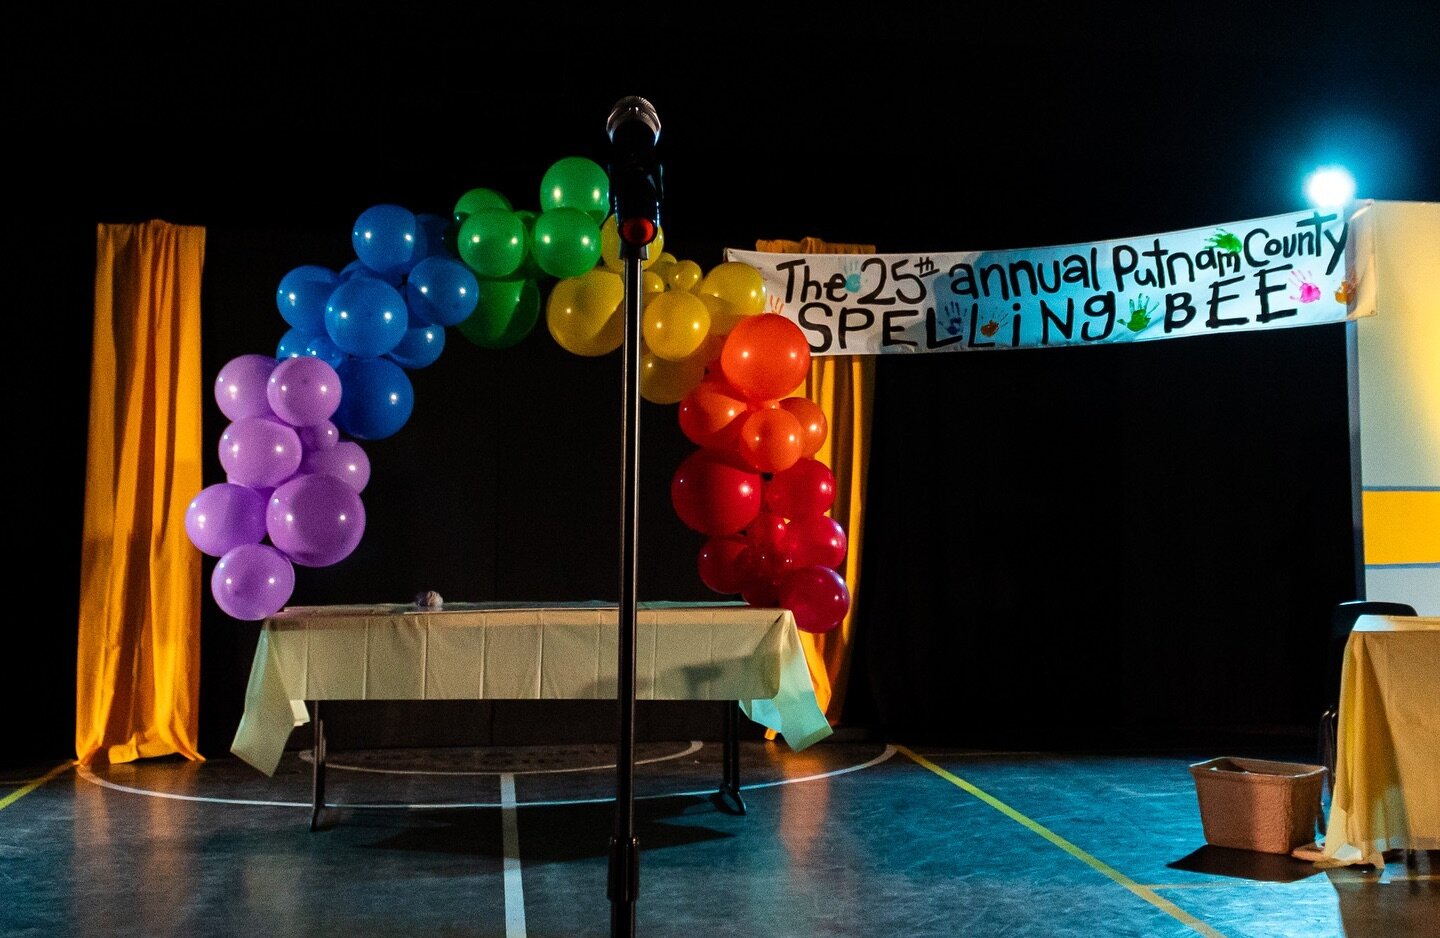 Get ready to be spellbound this weekend at THE 25TH ANNUAL PUTNAM COUNTY SPELLING BEE! 🐝✨ Join us for a buzzing good time filled with laughter, excitement, and unexpected twists.

The fun starts tonight so grab your seats now at esonline.org/spellin